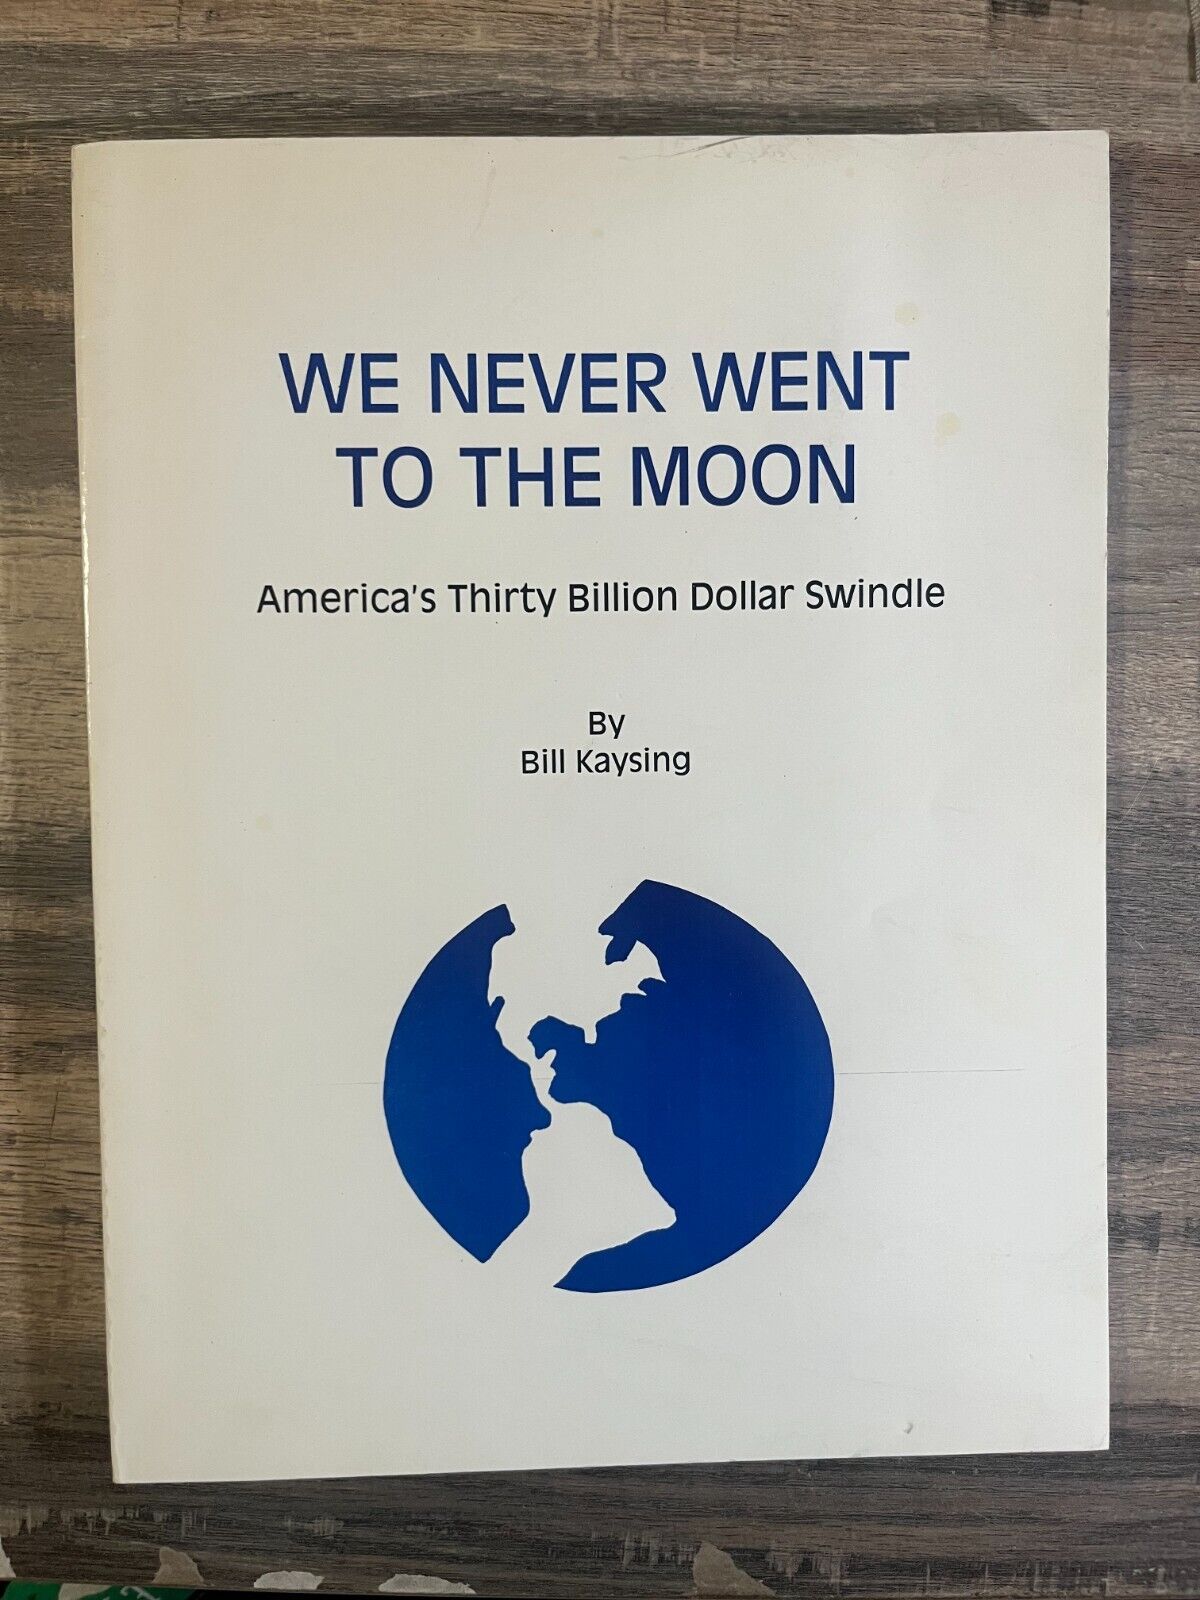 J2 - WE NEVER WENT TO THE MOON NASA by BILL KAYSING Vintage 2002 Apollo Project